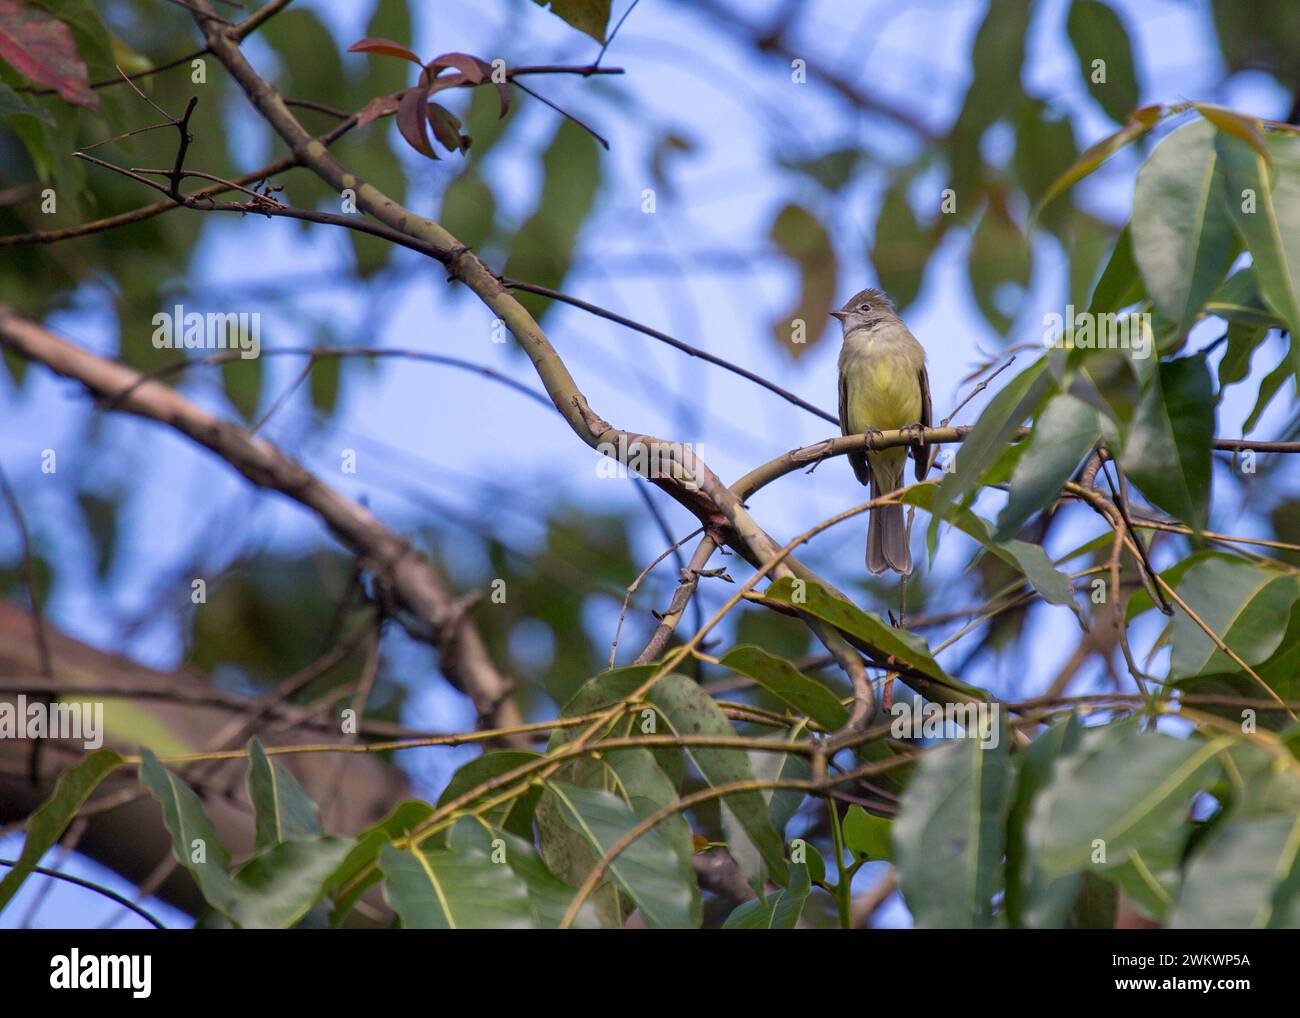 Yellow-Bellied Elaenia (Elaenia flavogaster) spotted outdoors Stock Photo